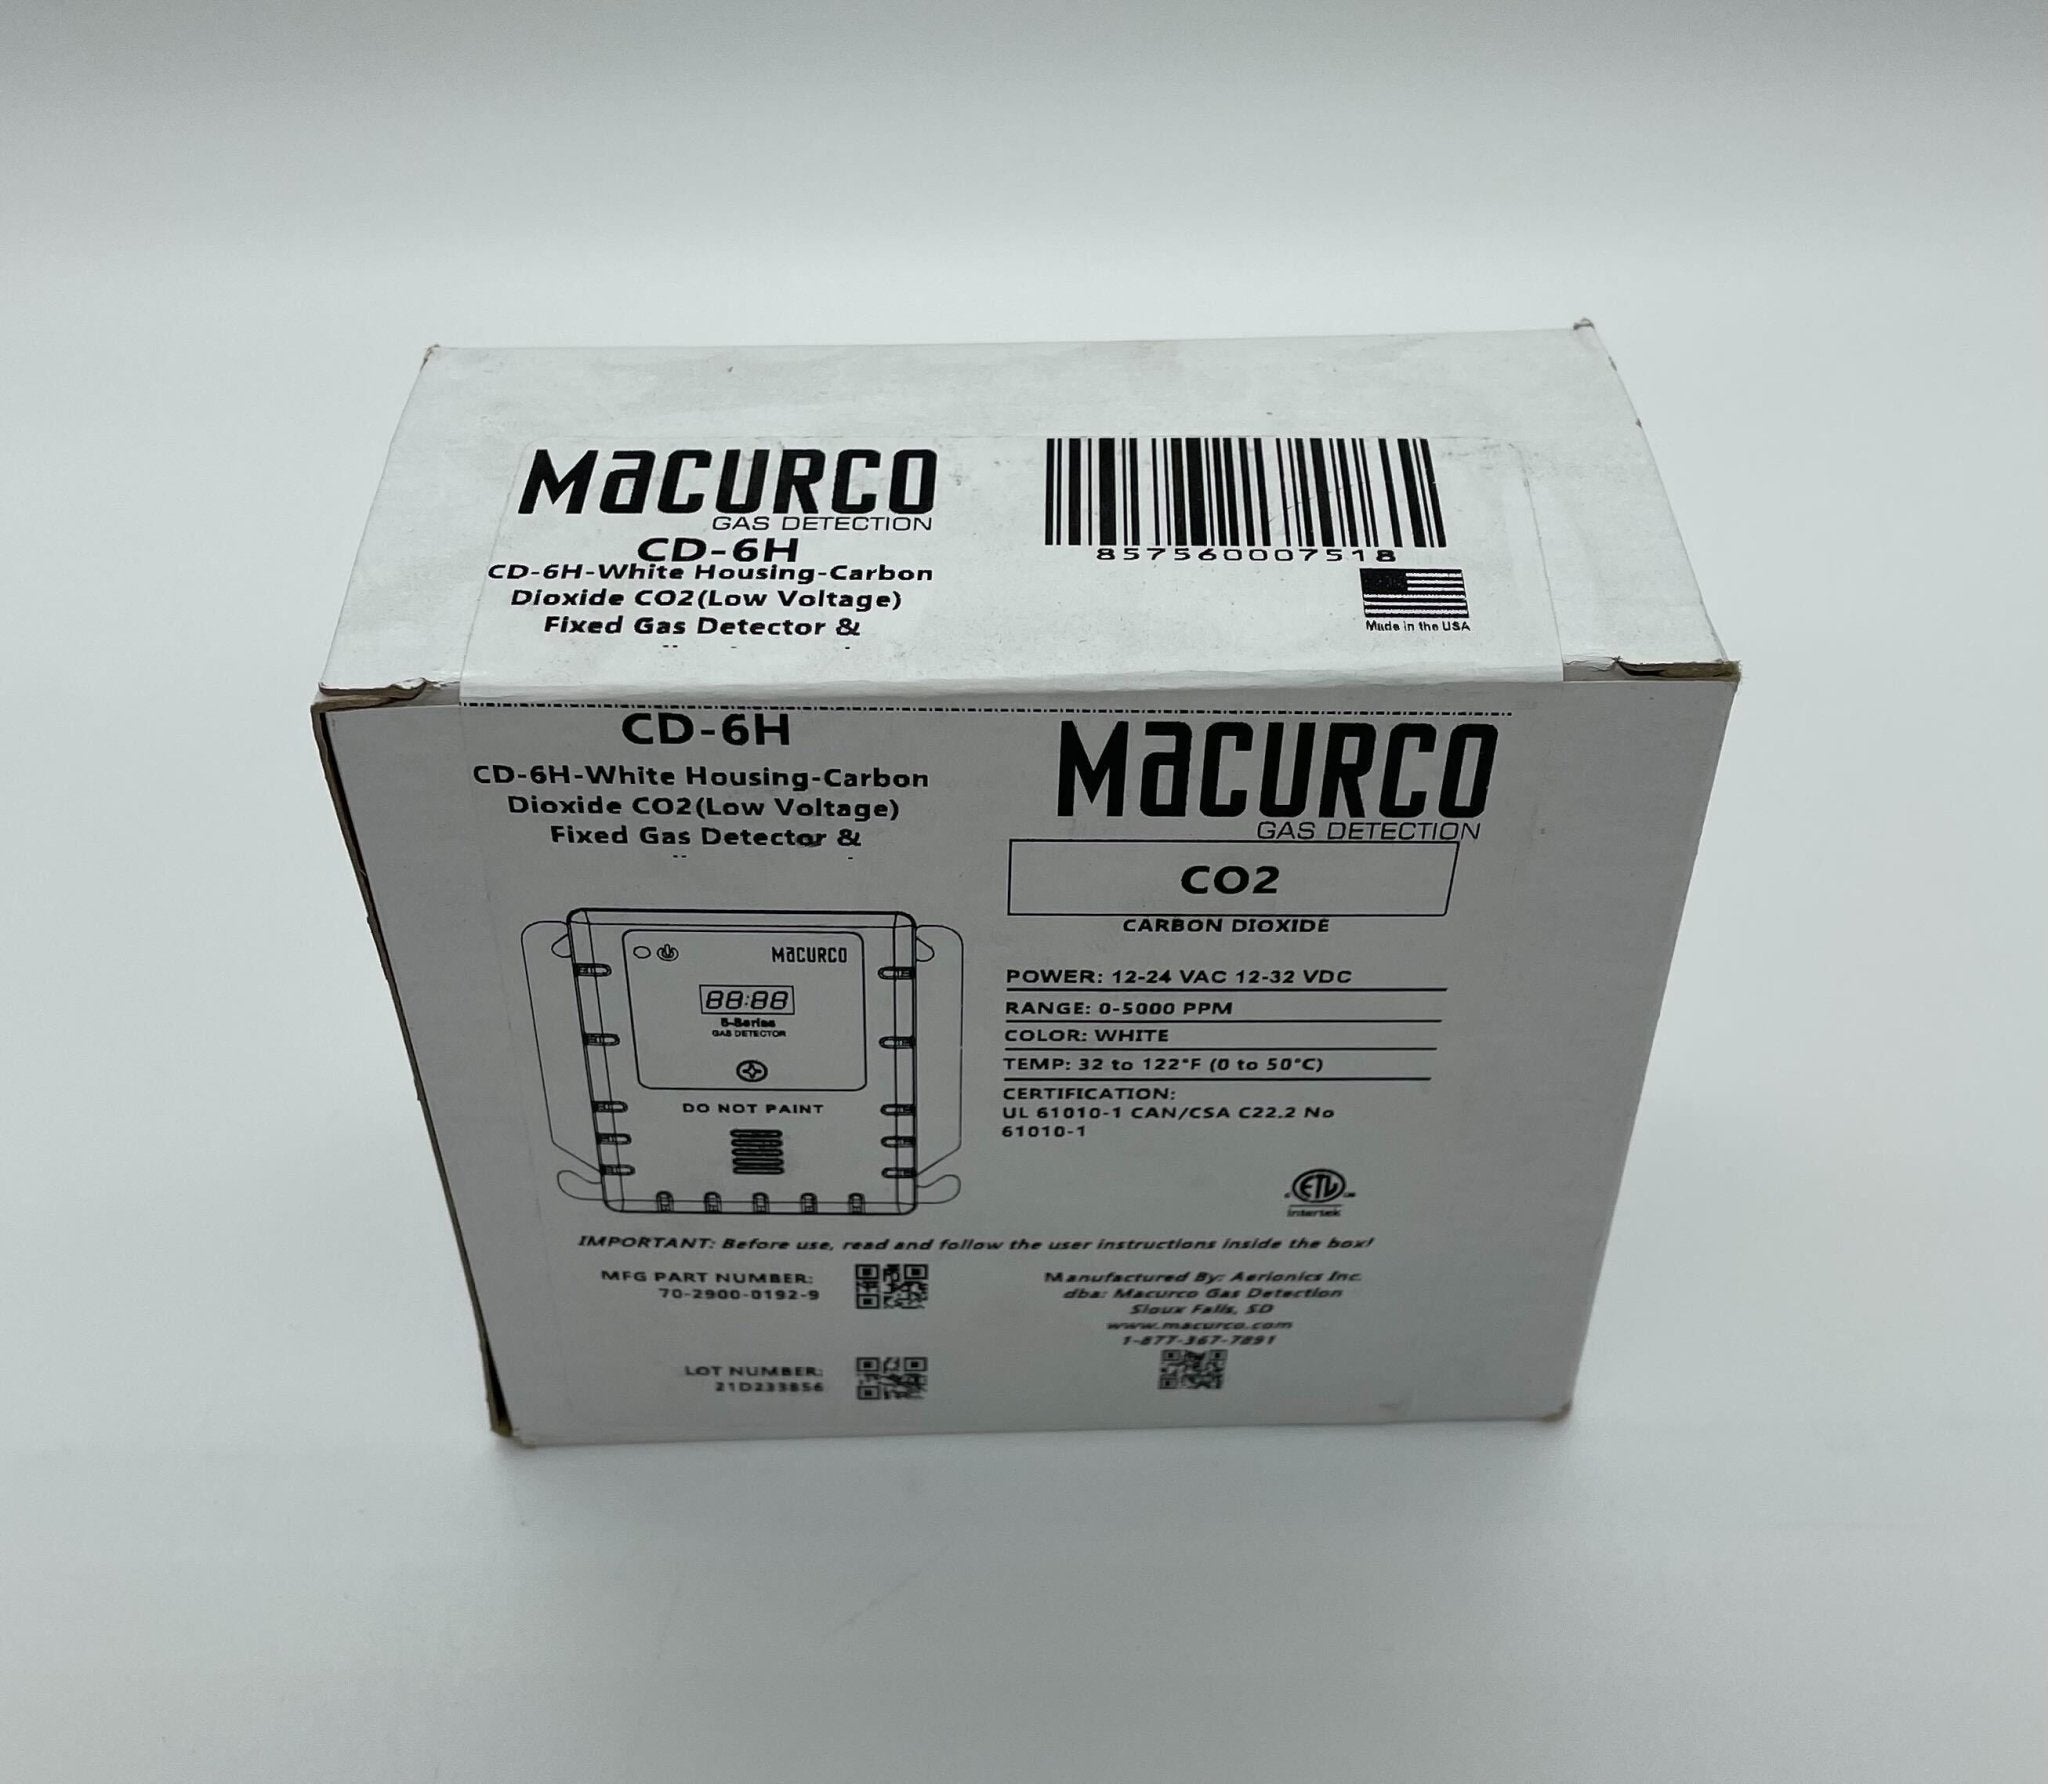 Macurco CD-6H Carbon Dioxide Gas Detector - The Fire Alarm Supplier